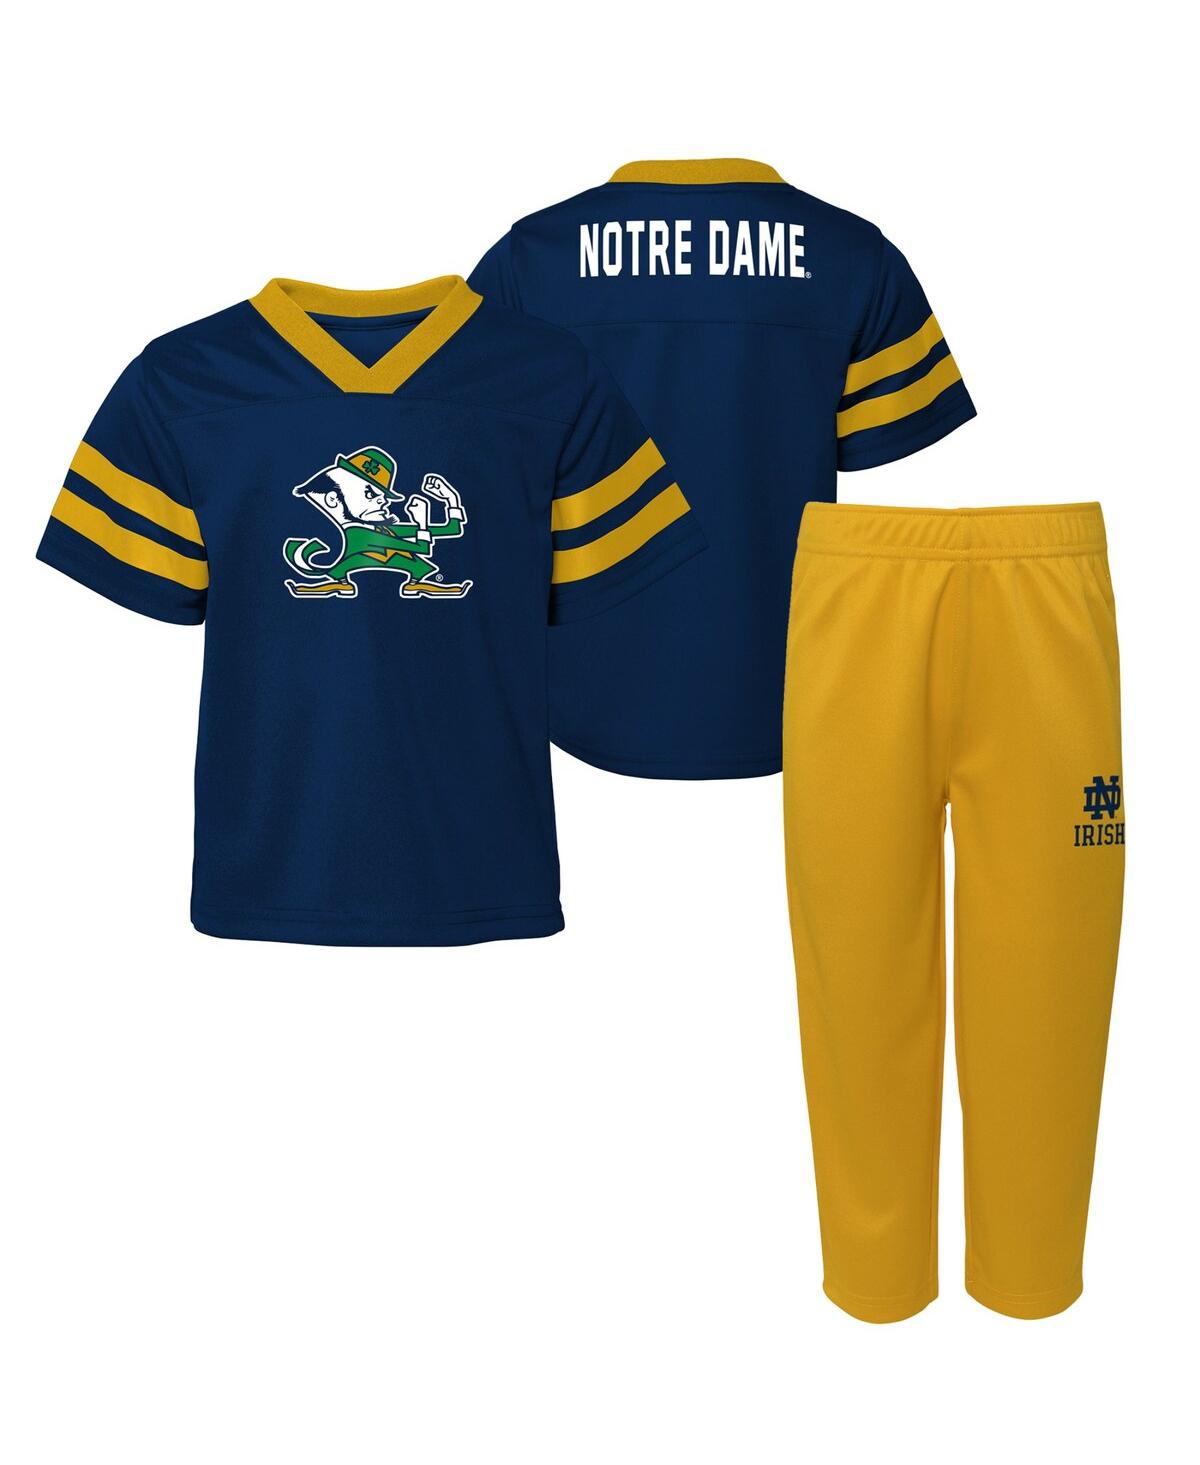 Outerstuff Babies' Toddler Boys And Girls Navy Notre Dame Fighting Irish Two-piece Red Zone Jersey And Pants Set